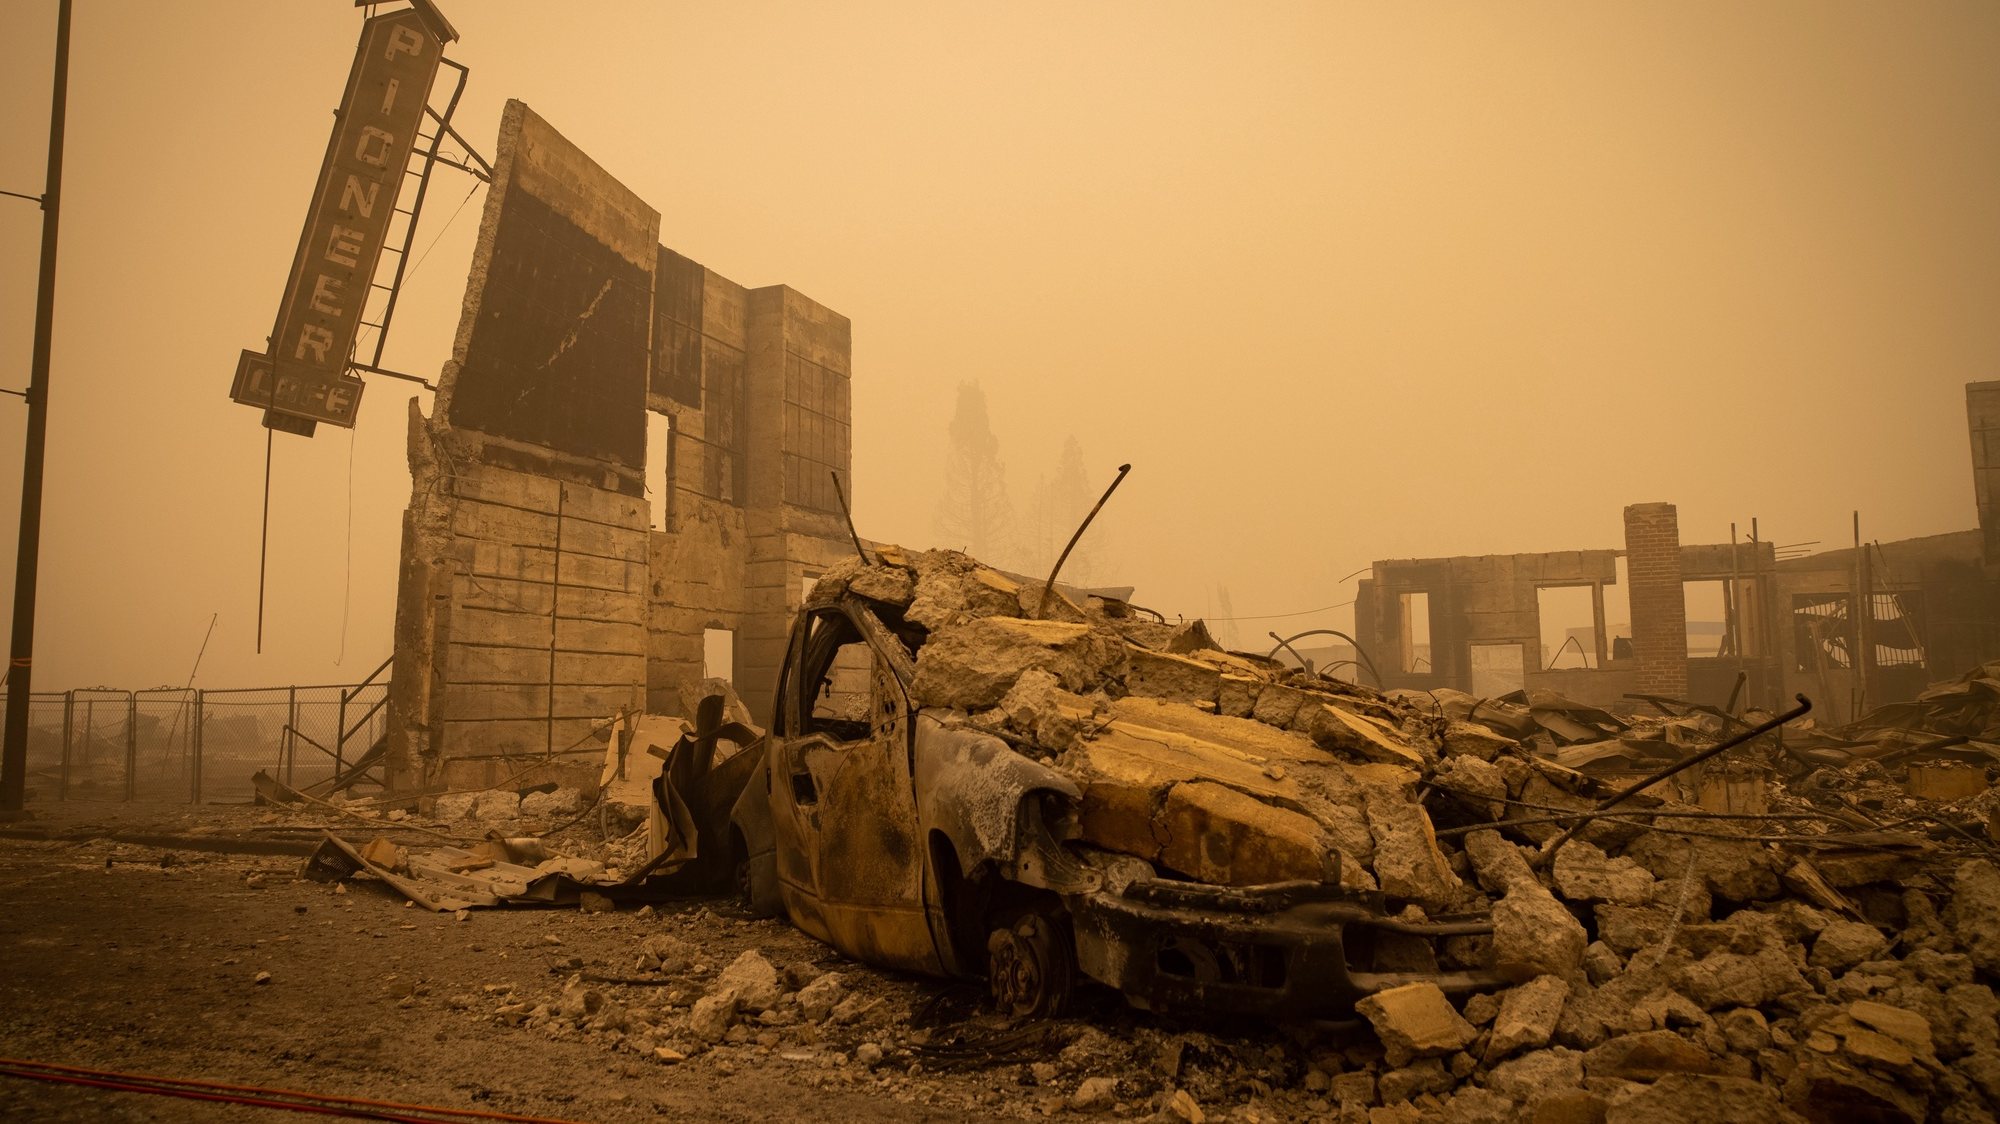 epa09404930 Buildings and vehicles are left destroyed by the Dixie Fire in Greenville, California, USA, 07 August 2021. The Dixie Fire had grown to over 440,000 acres as of 07 August.  EPA/CHRISTIAN MONTERROSA